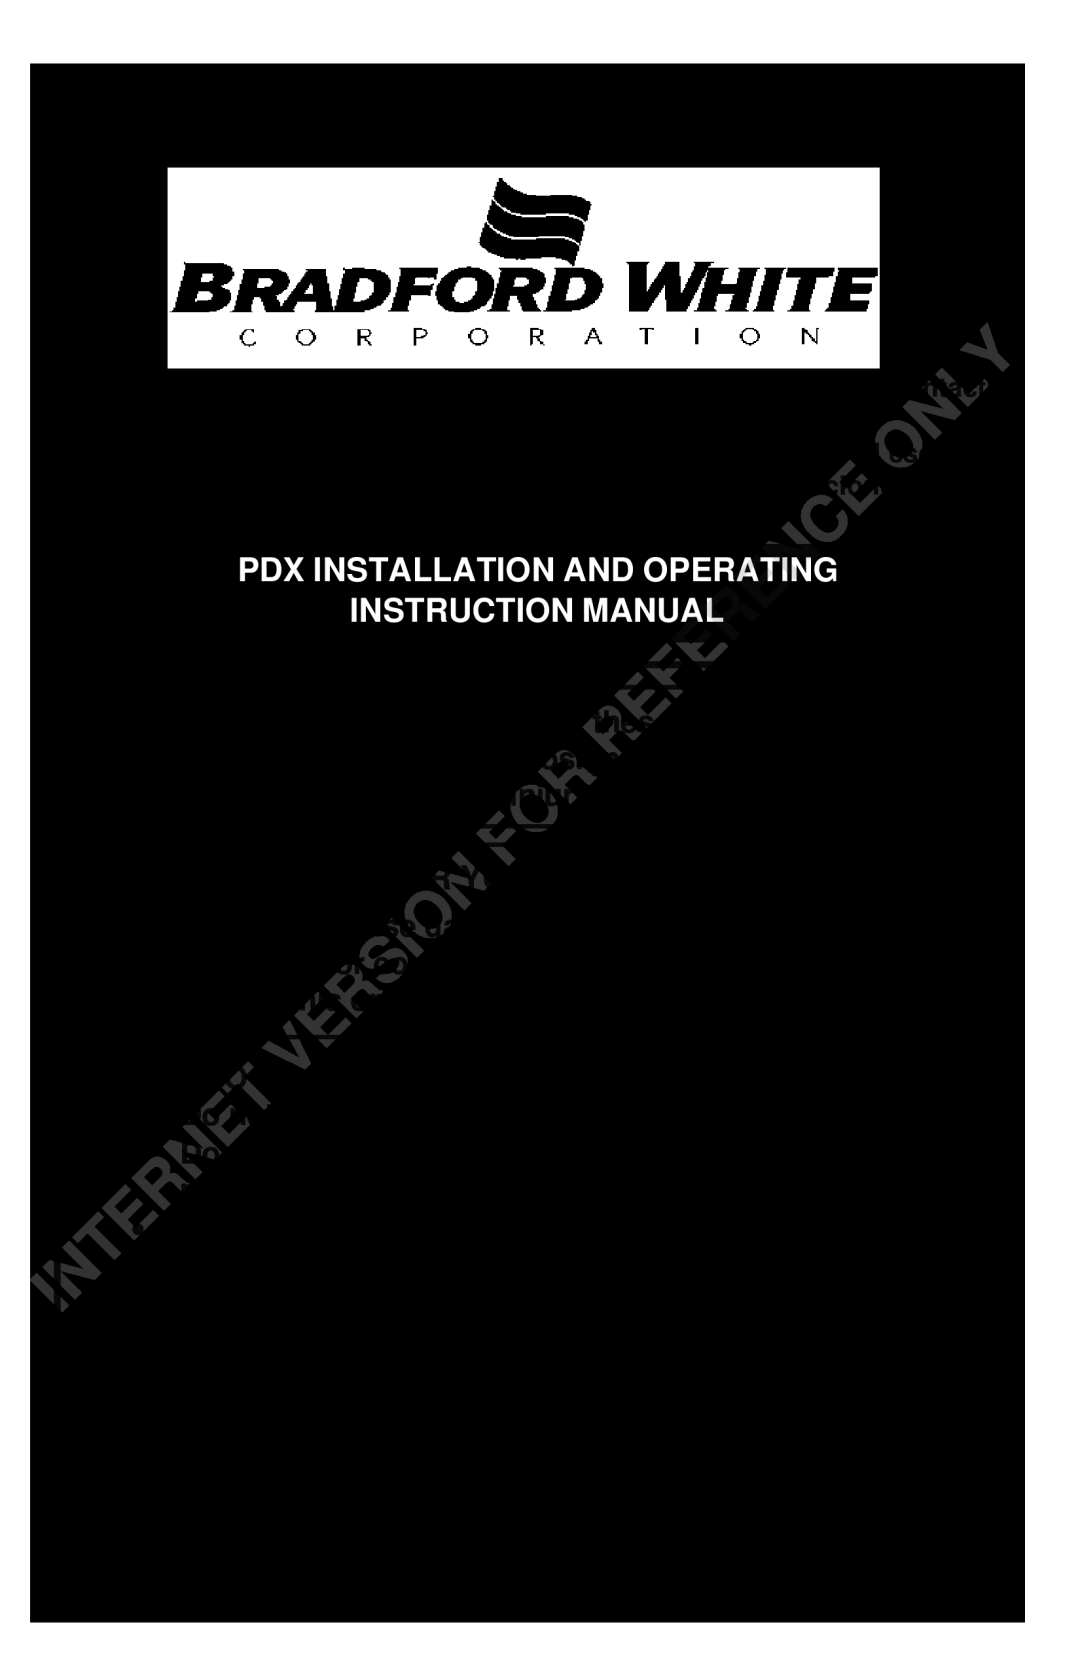 Bradford-White Corp Powered Direct Vent Series instruction manual Pdx Installation And Operati G Instruction Manual 